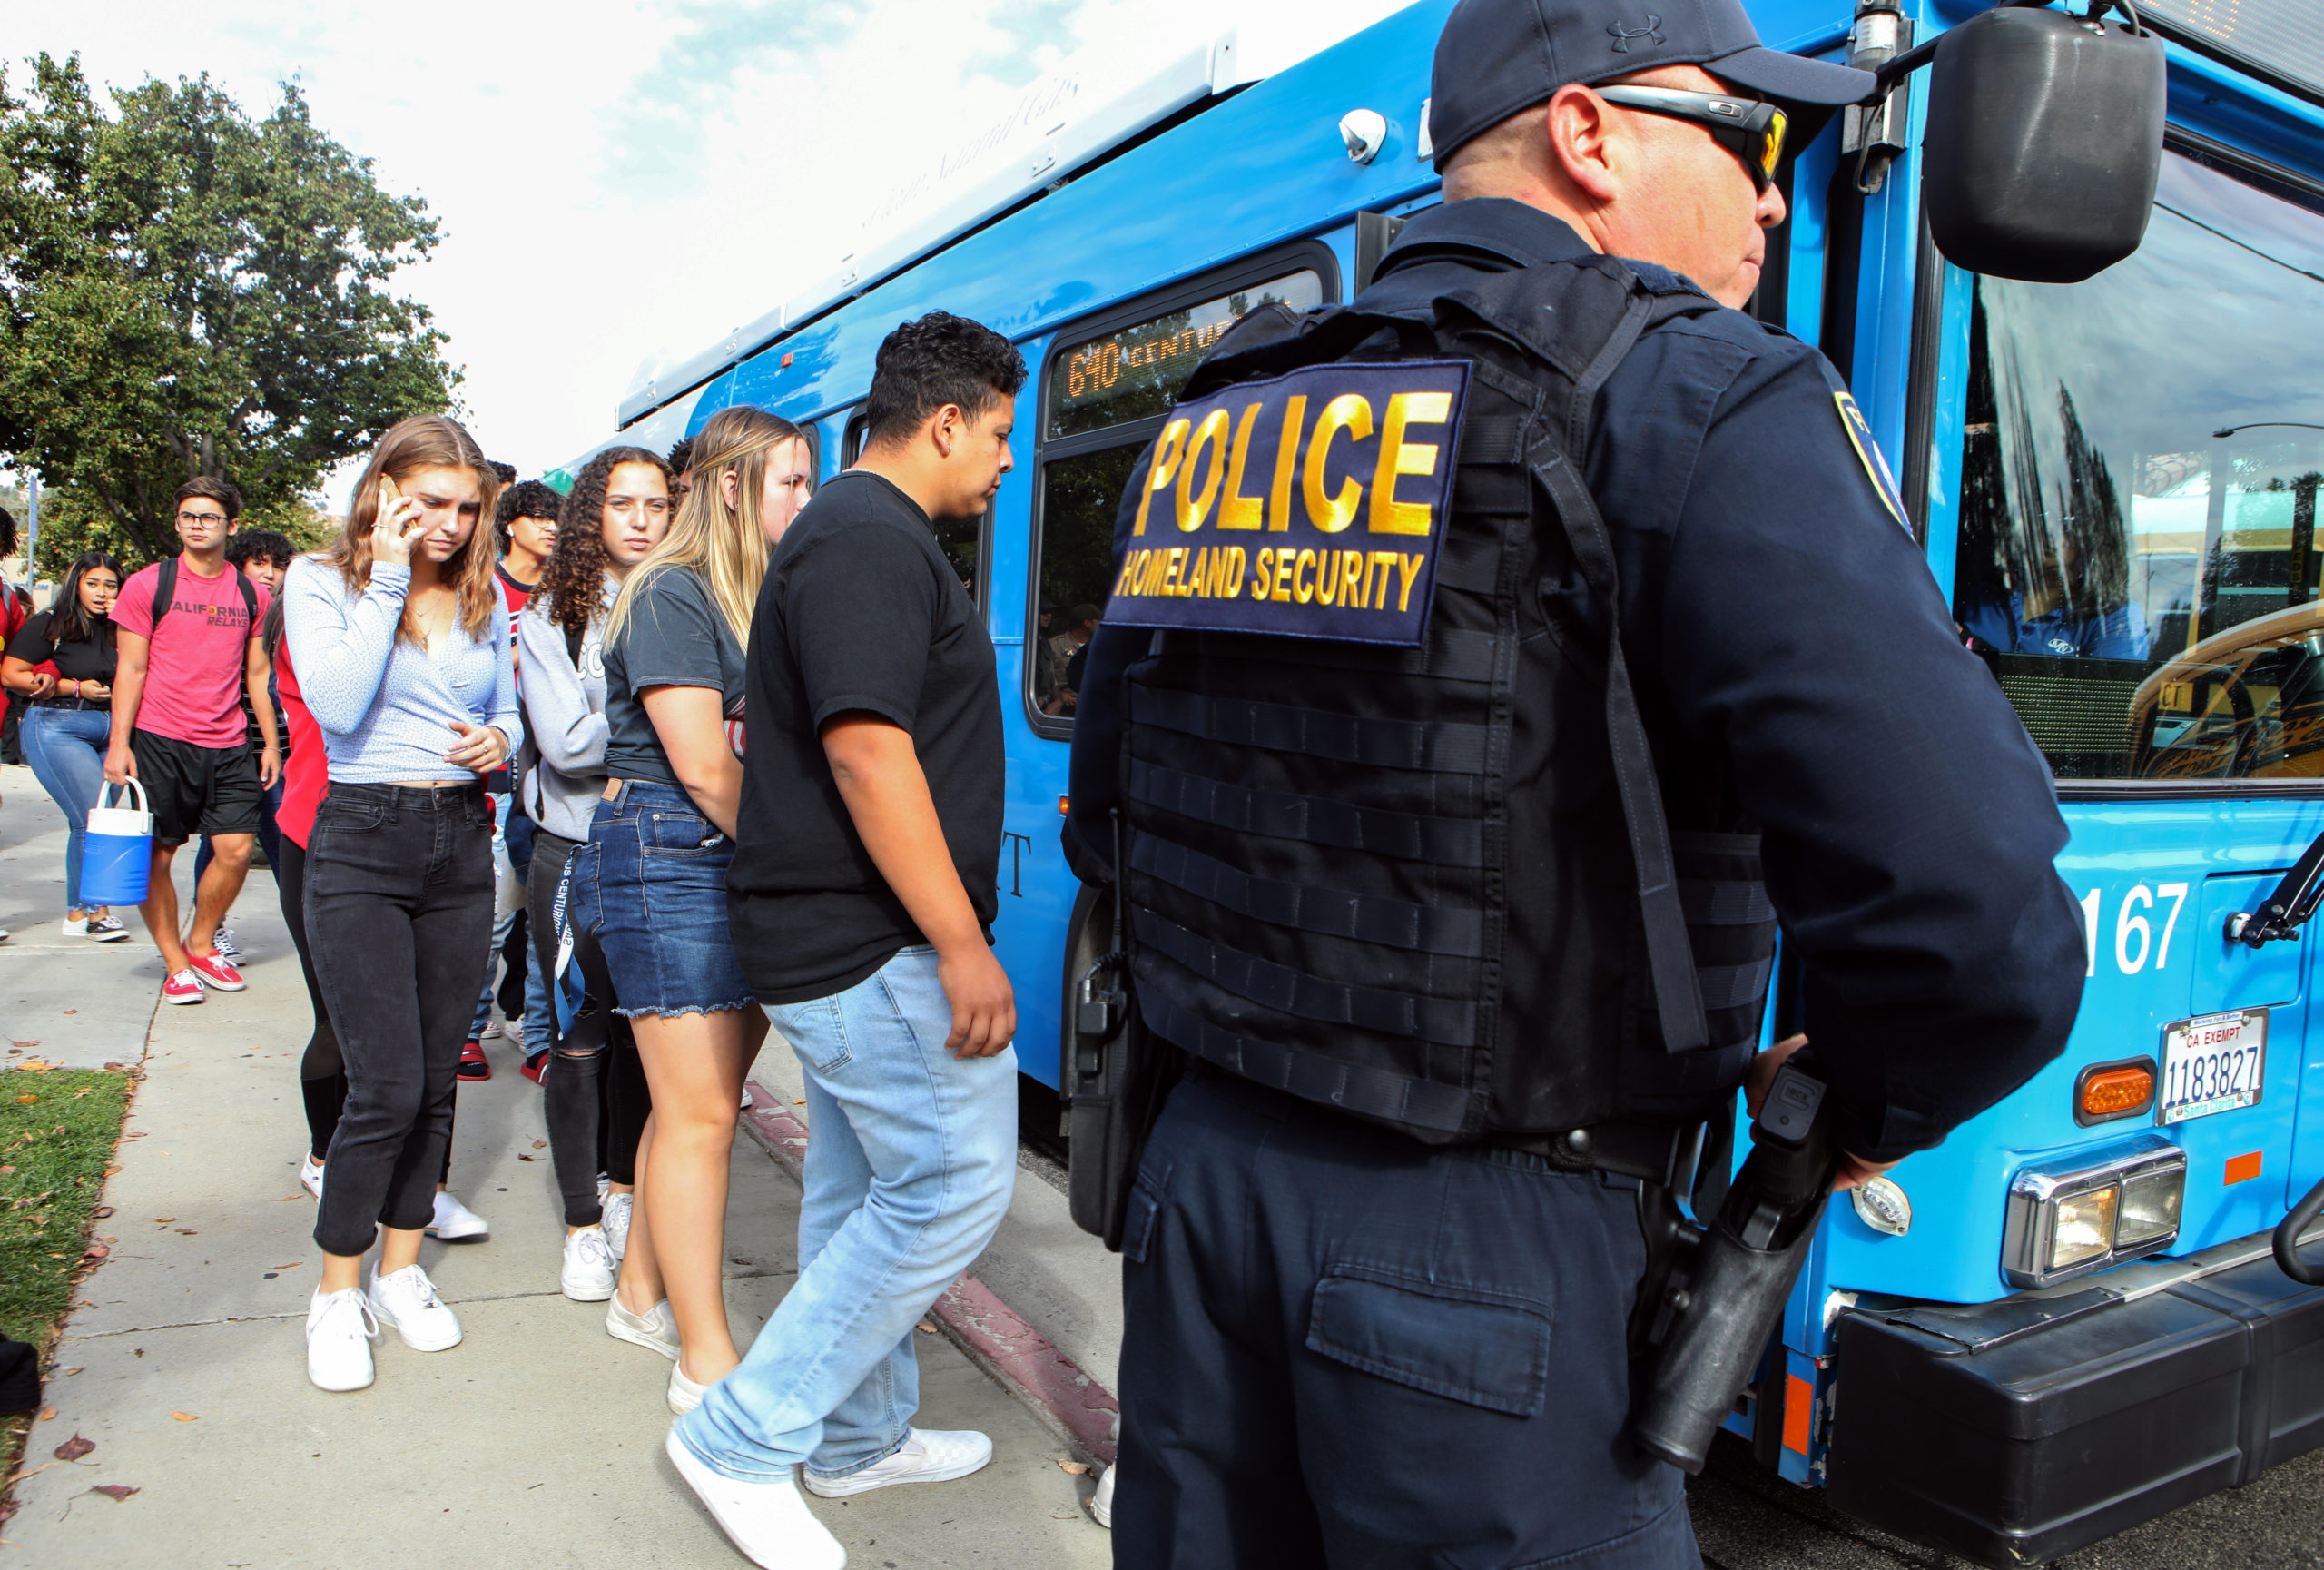 Students are evacuated from Saugus High School onto a bus after a shooting at the school left two students dead and three wounded on November 14, 2019 in Santa Clarita, California. A suspect in the shooting is being treated at a local hospital for a gunshot wound to the head. (Photo by Mario Tama/Getty Images)